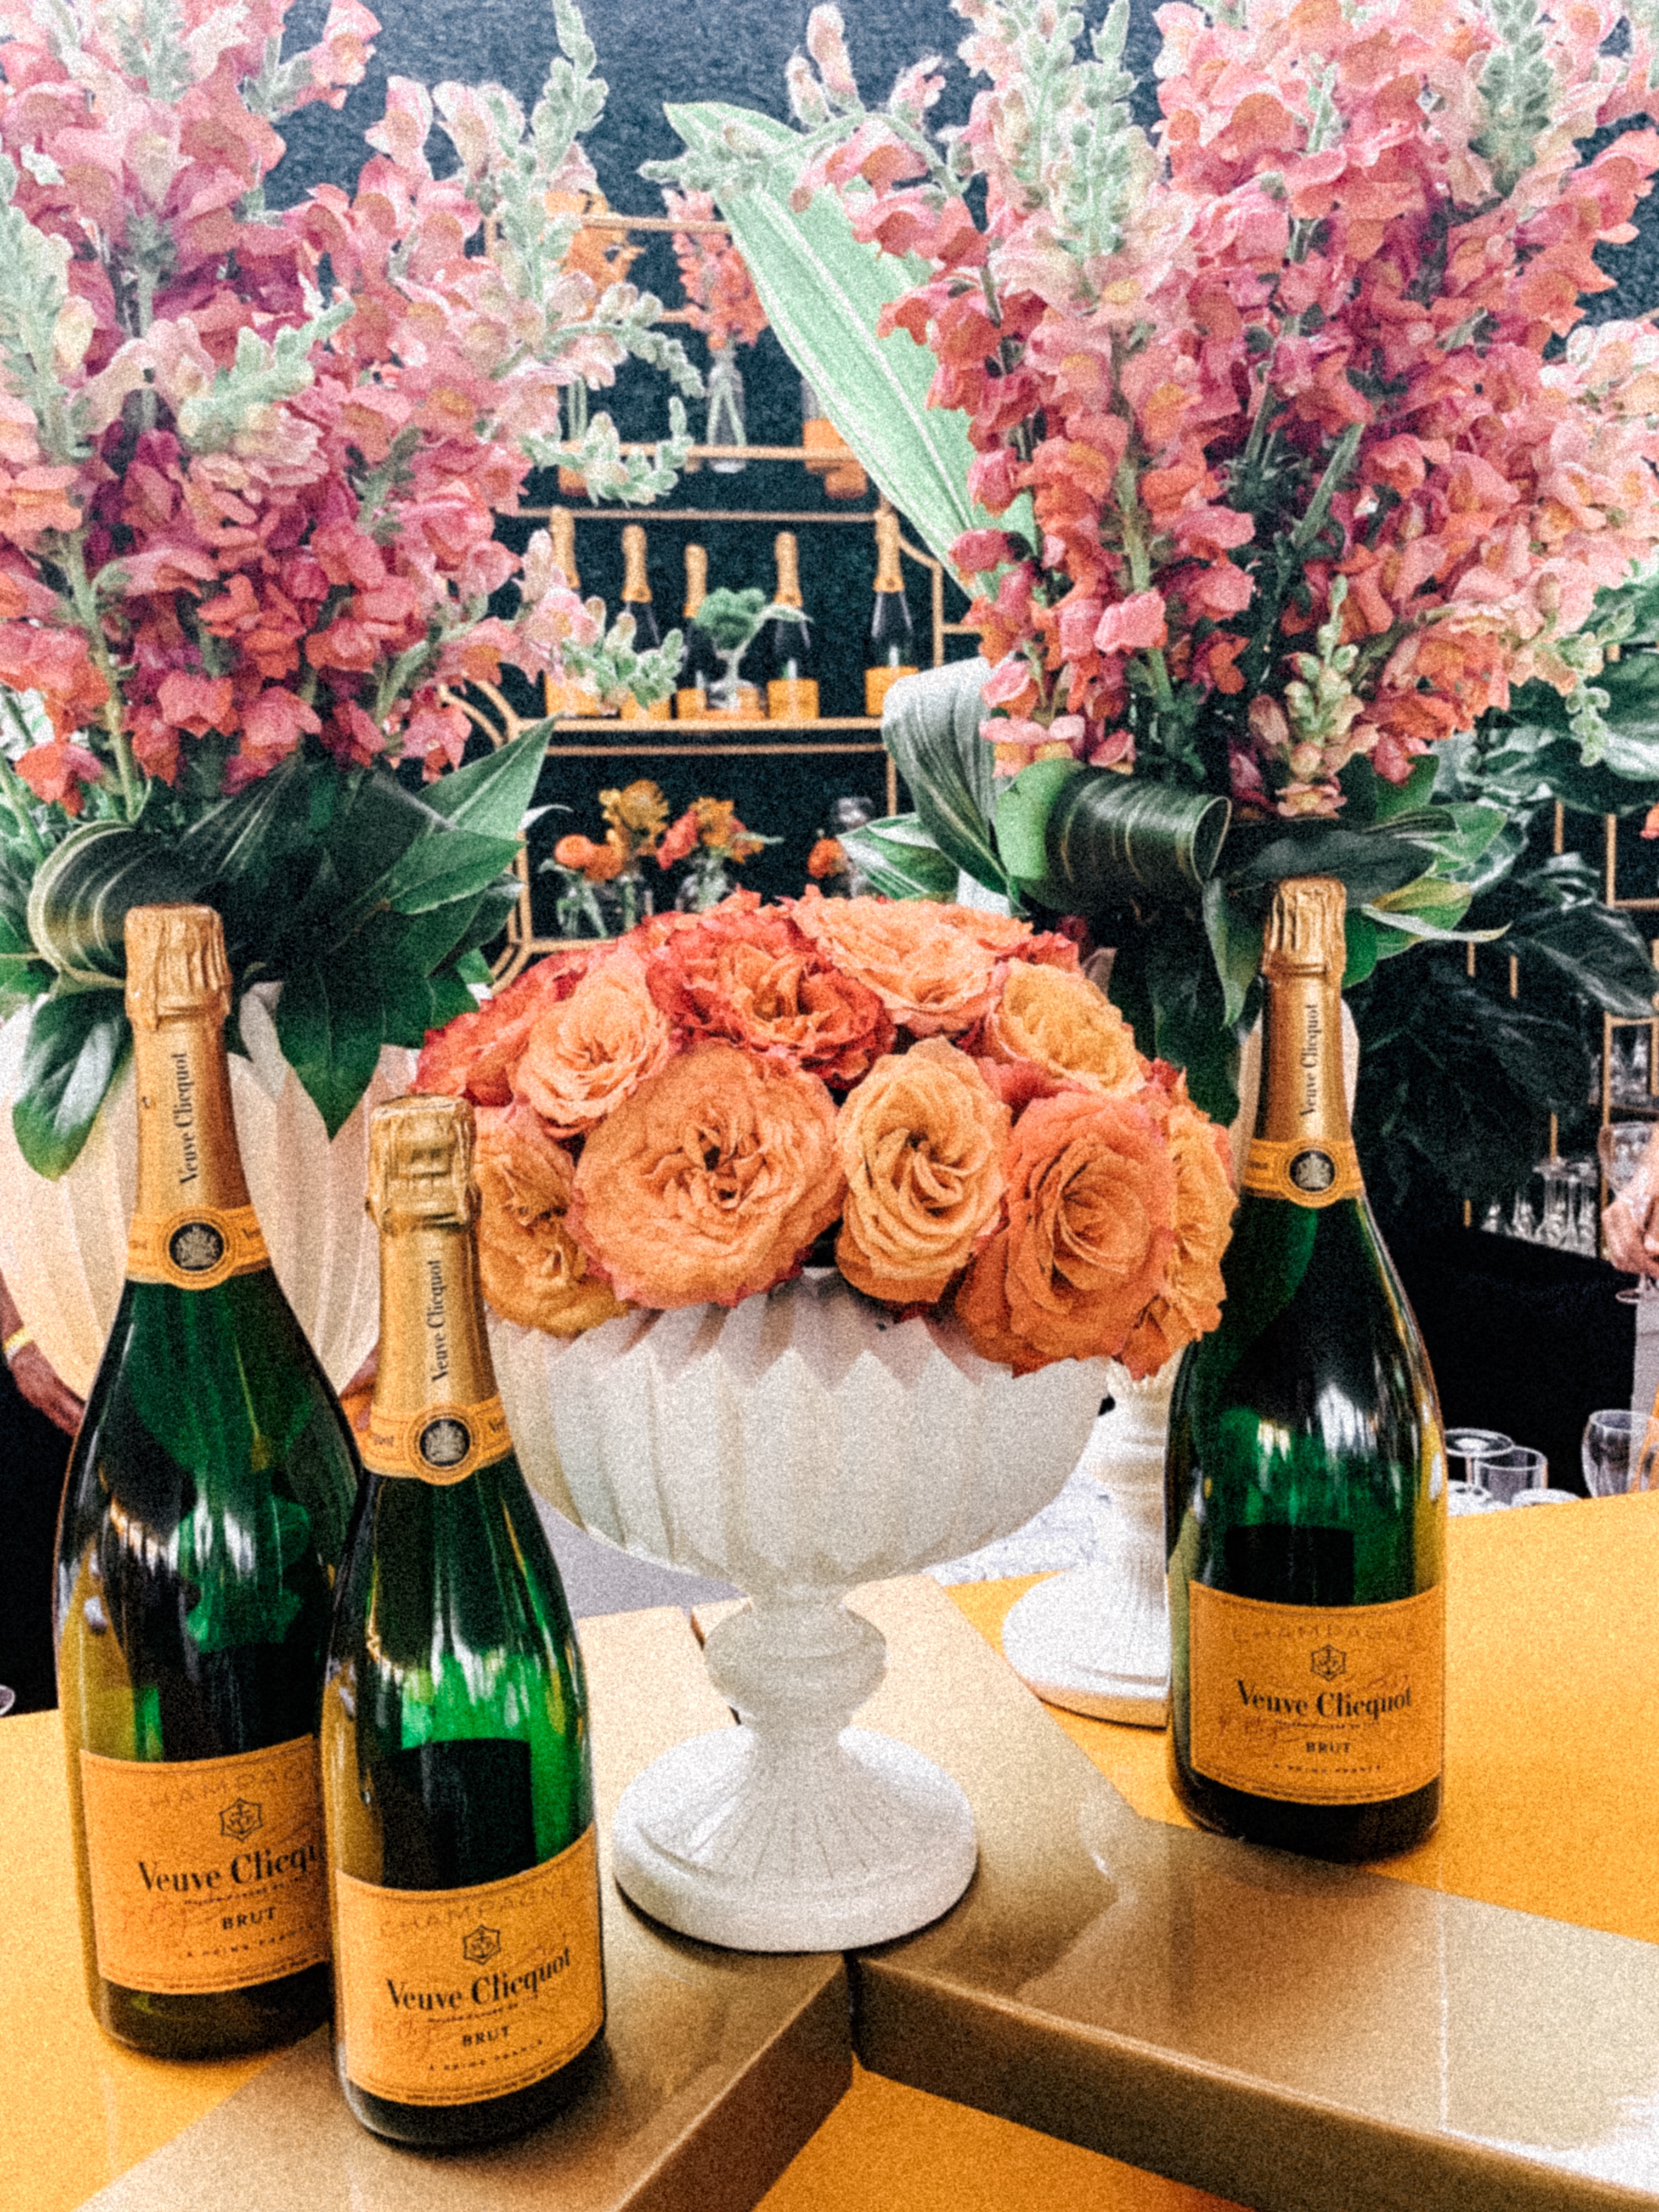 The Veuve Clicquot Polo Classic-VCPC-NYC-Liberty State Park-Events-DVF-Style-Outfit-Westchester Blogger #vcstyle #VeuveClicquot #vcpc #nyc #events #food #summer VIP Tent #champagne #drinks #cocktails